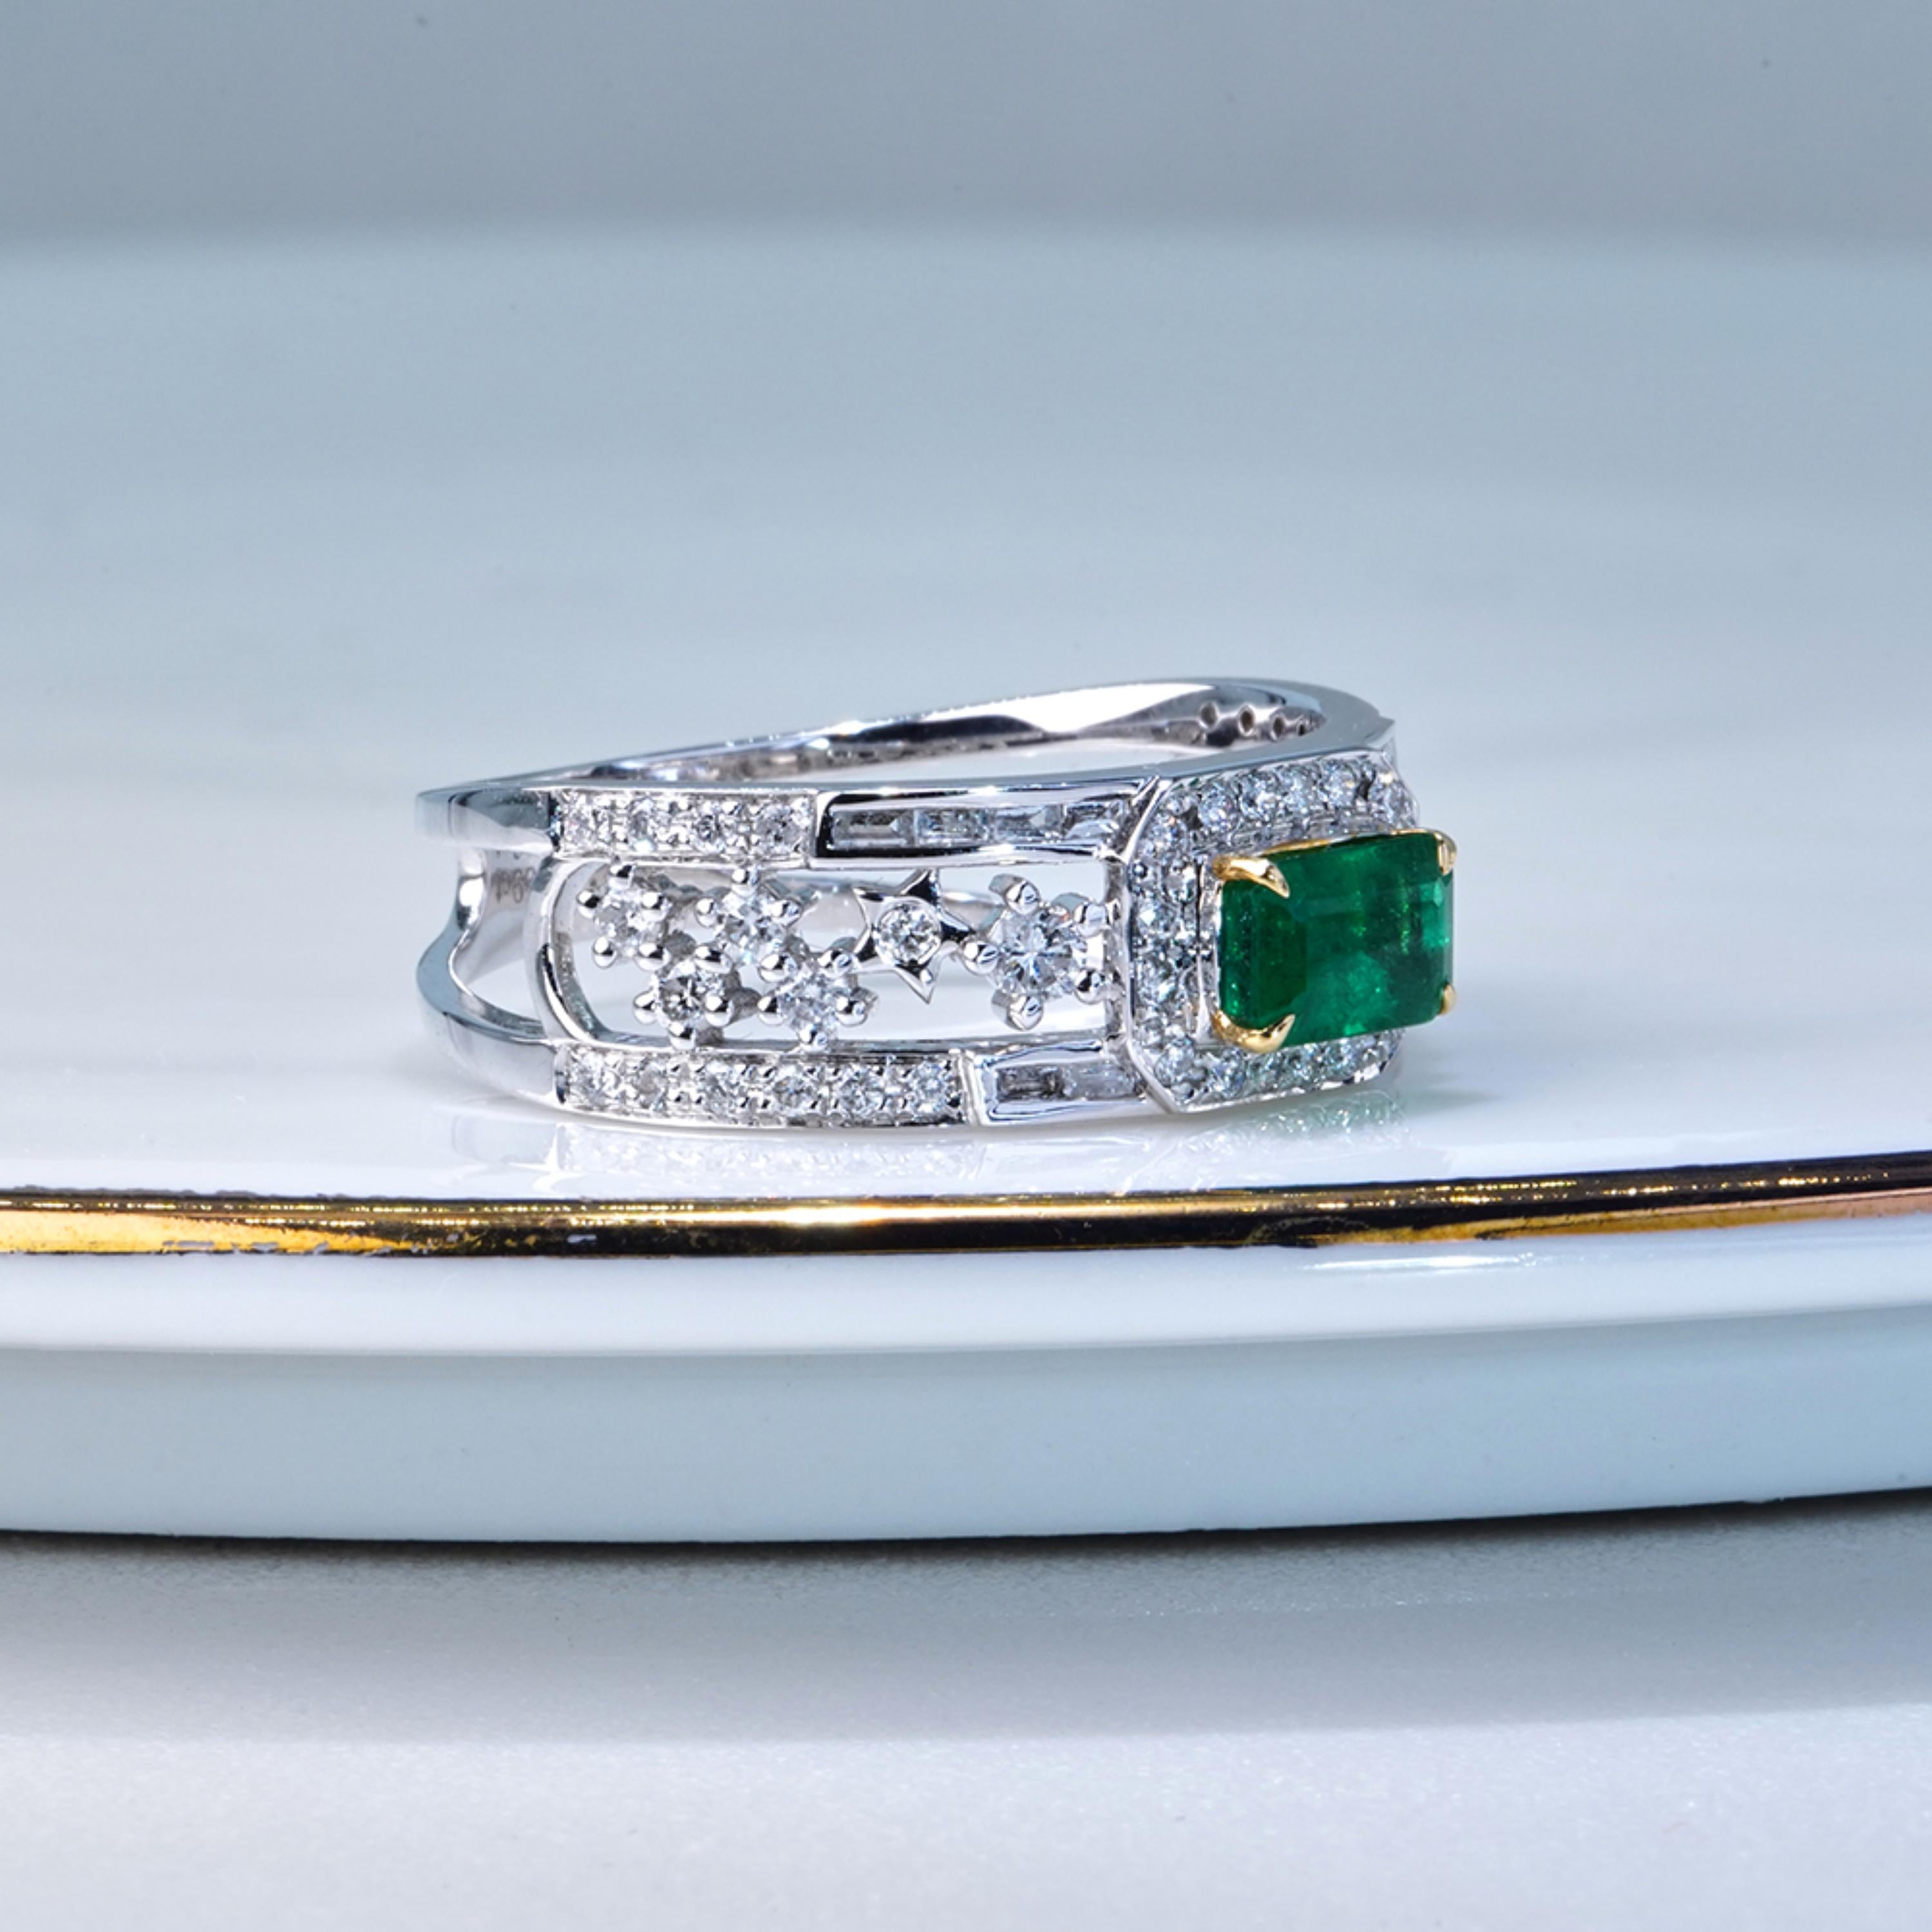 18K Gold Natural Emerald and Diamond Antique Art Deco Style Engagement Band Ring

A stunning ring featuring IGI/GIA Certified 0.52 Carat Natural Emerald and 0.98 Carat of Diamond Accents set in 18K Solid Gold.

Emeralds are highly valued for their